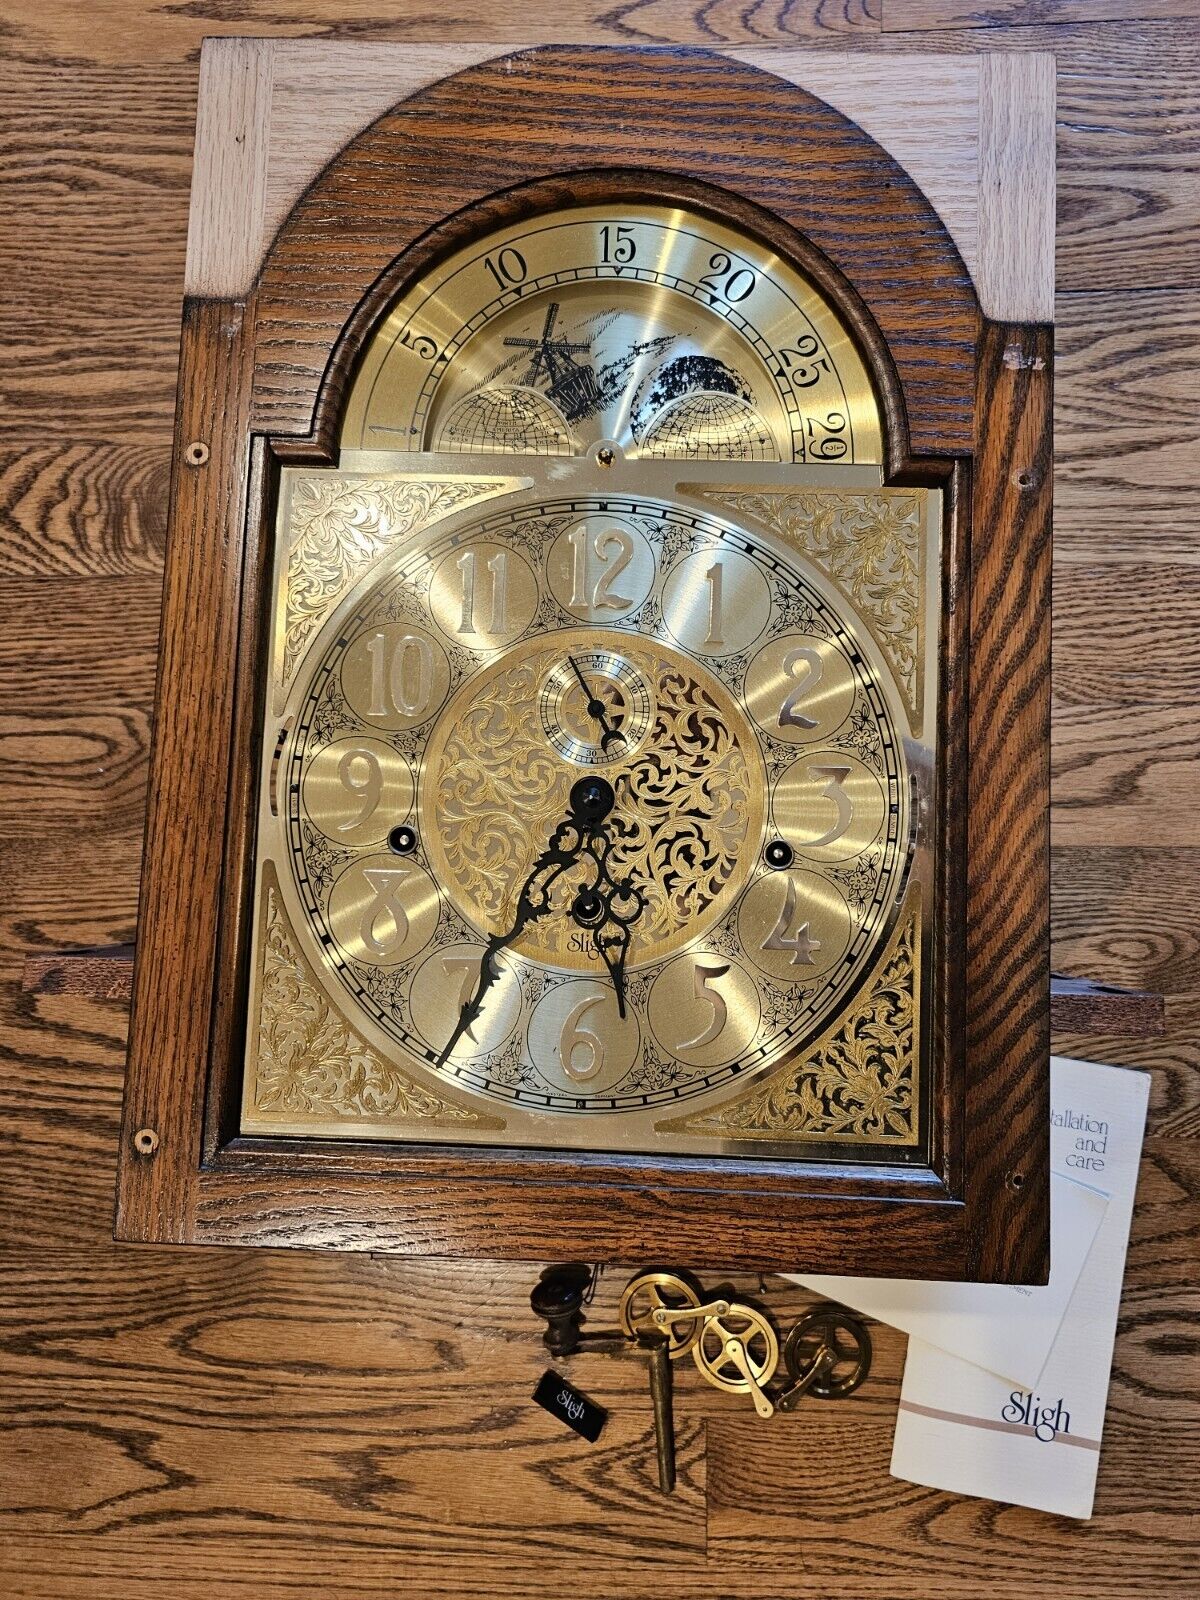 Sligh 0937-1-AB Triple Chime Grandfather Clock Dial With Kieninger 01K Movement 